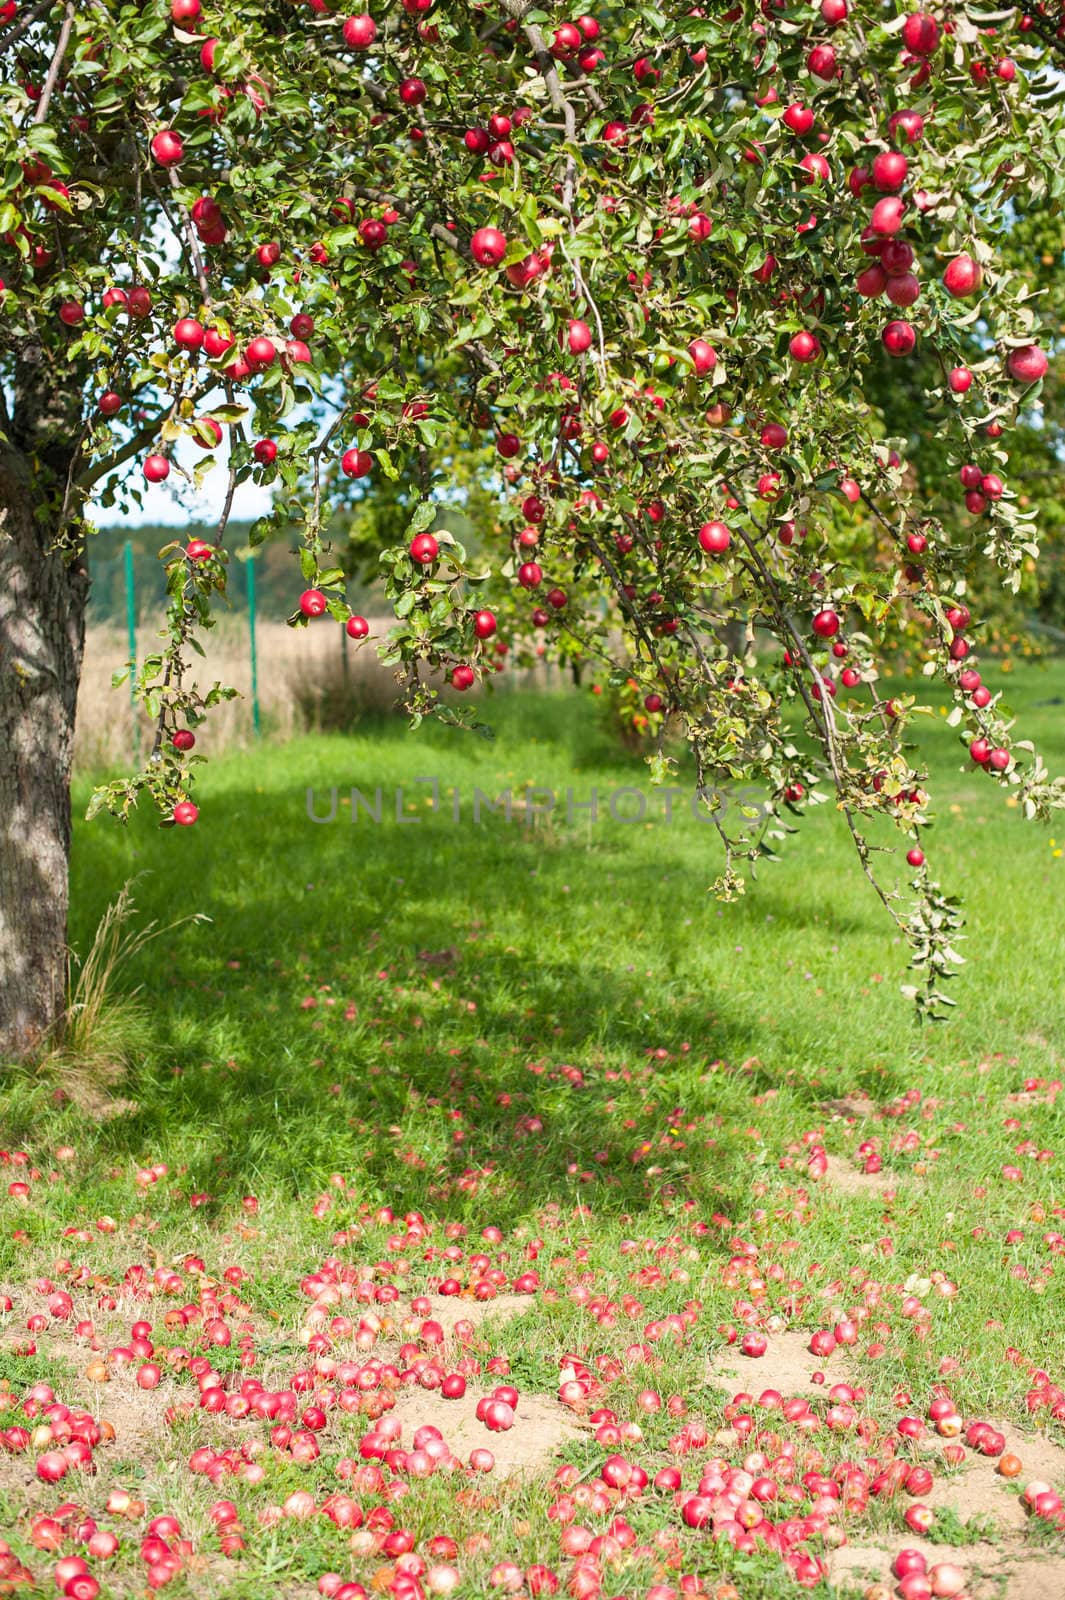 Branches of an apple tree are full of red ripe apples. Many of the fruits are lying under the tree already.